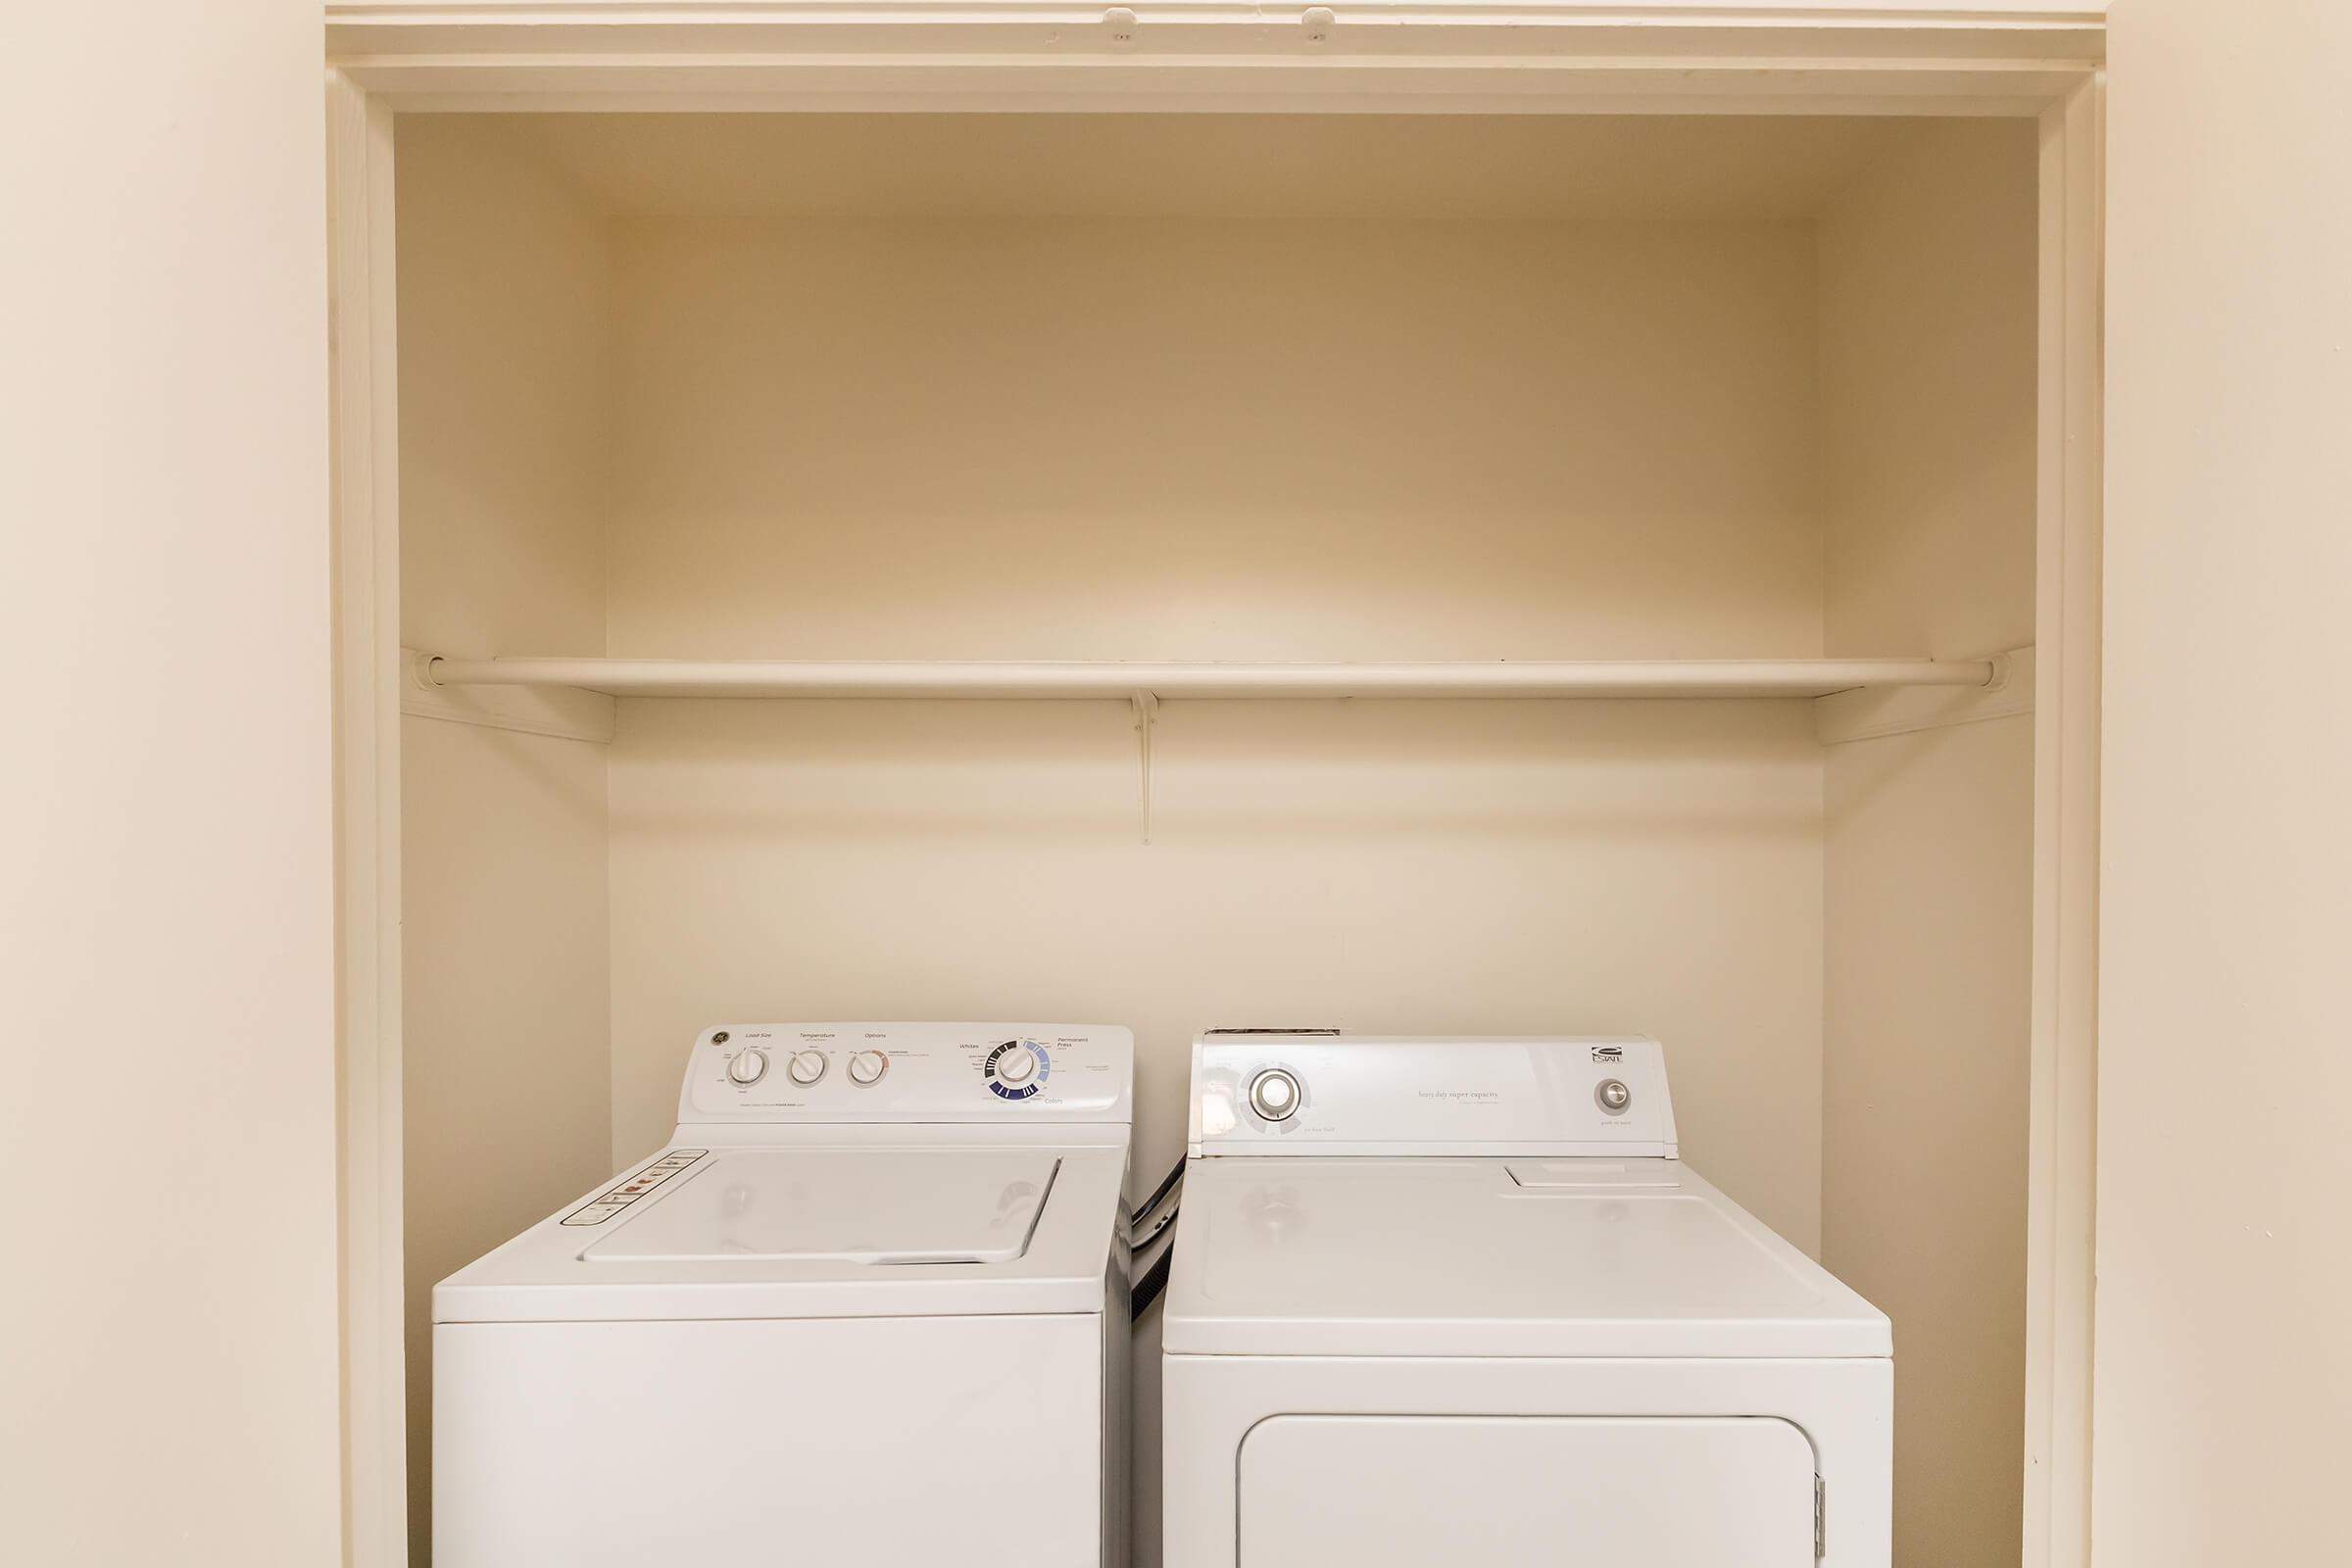 WASHER AND DRYER IN 2 BR APARTMENT FOR RENT IN JACKSON, TN